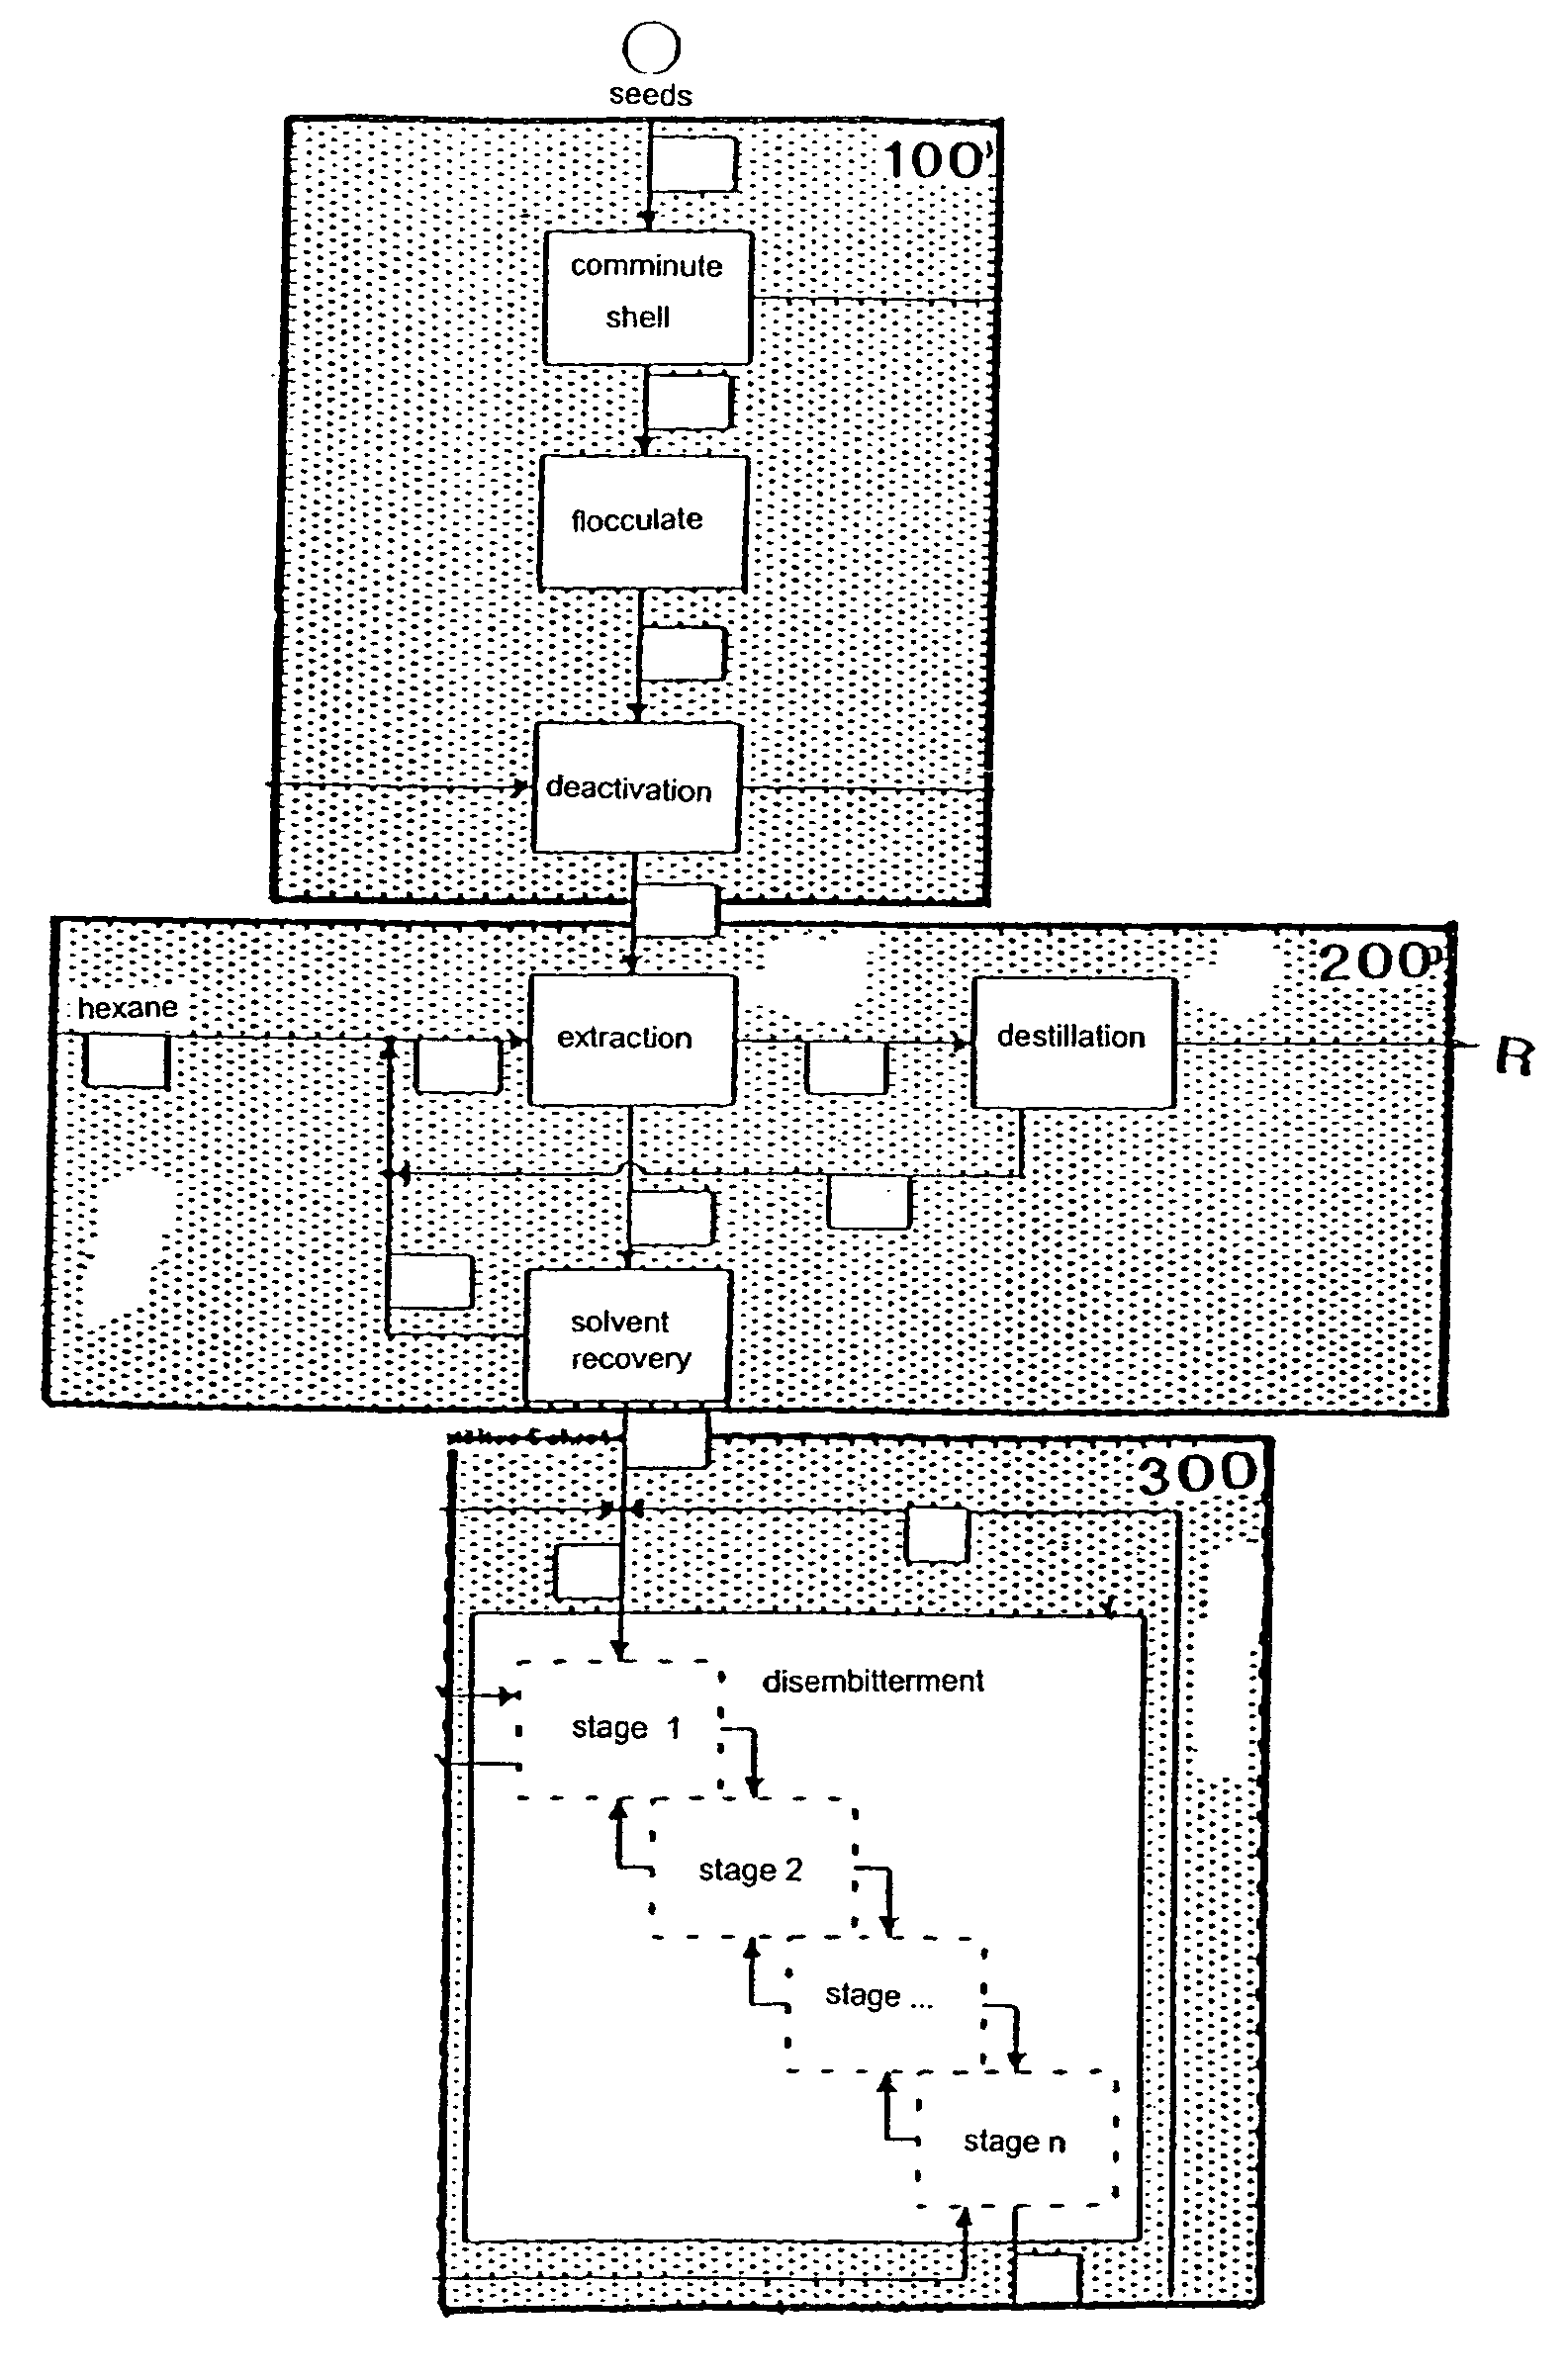 Method for treating and processing lupine seeds containing alkaloid, oil and protein